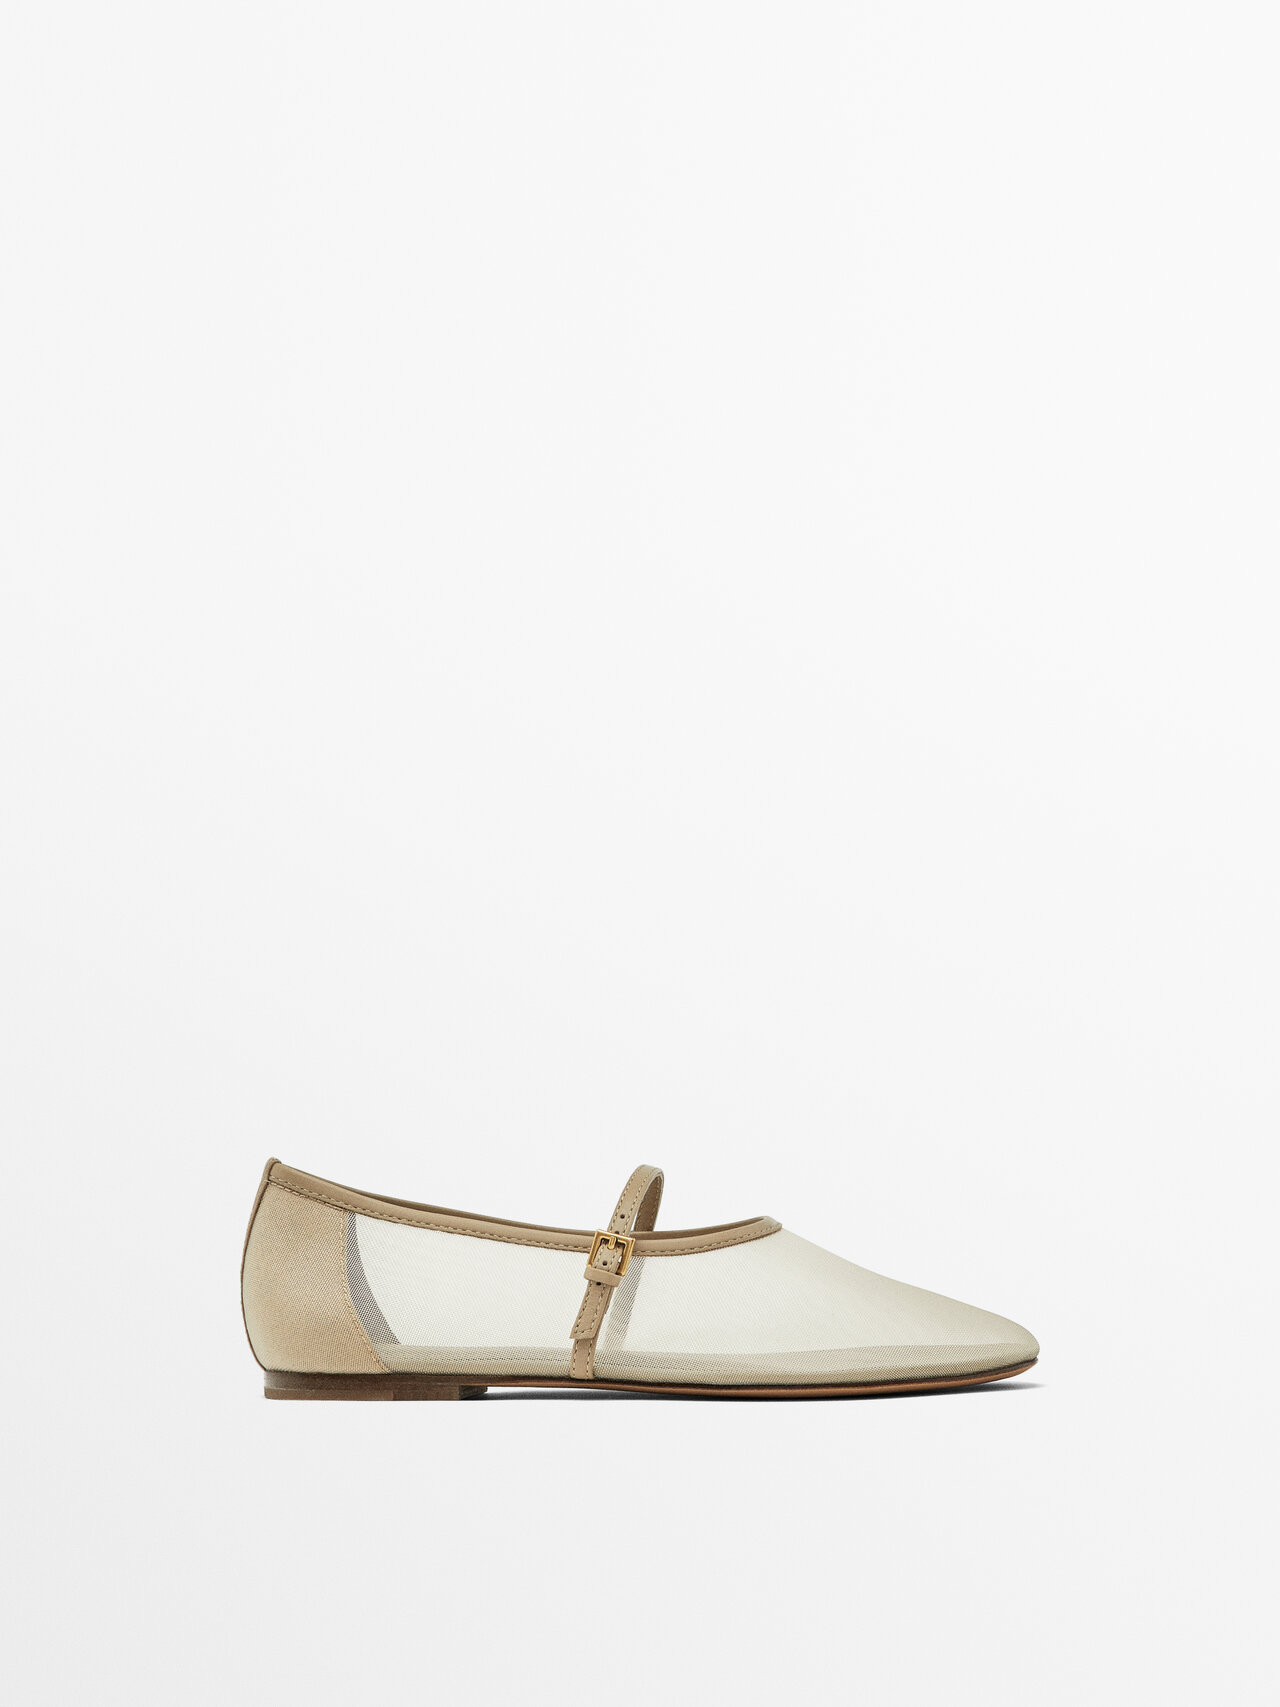 Massimo Dutti Mesh Ballet Flats With Strap Across The Instep In Cream